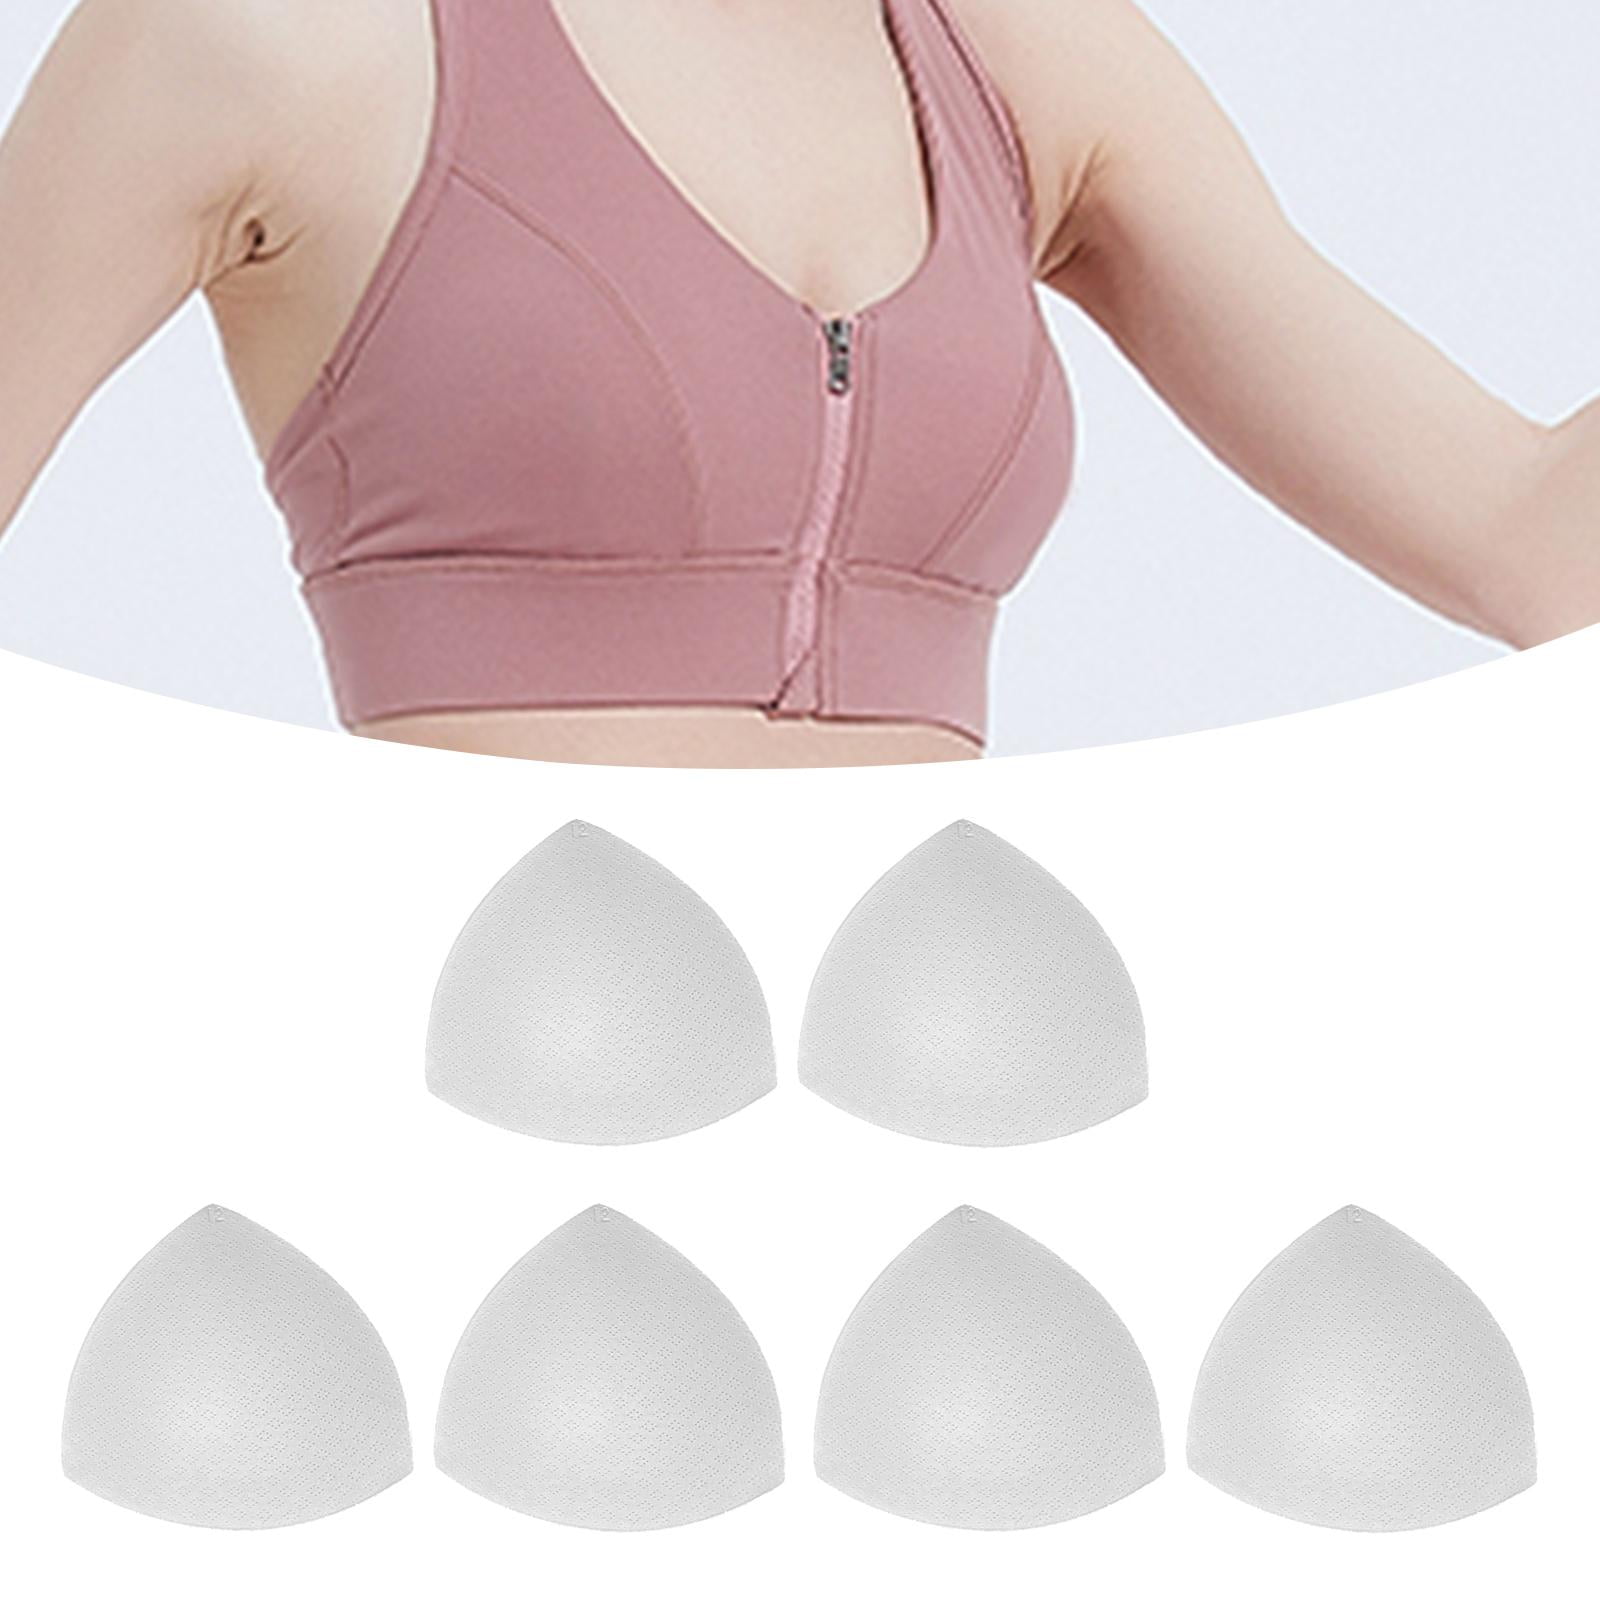 Any ideas for what I can use these bra inserts for? : r/Frugal